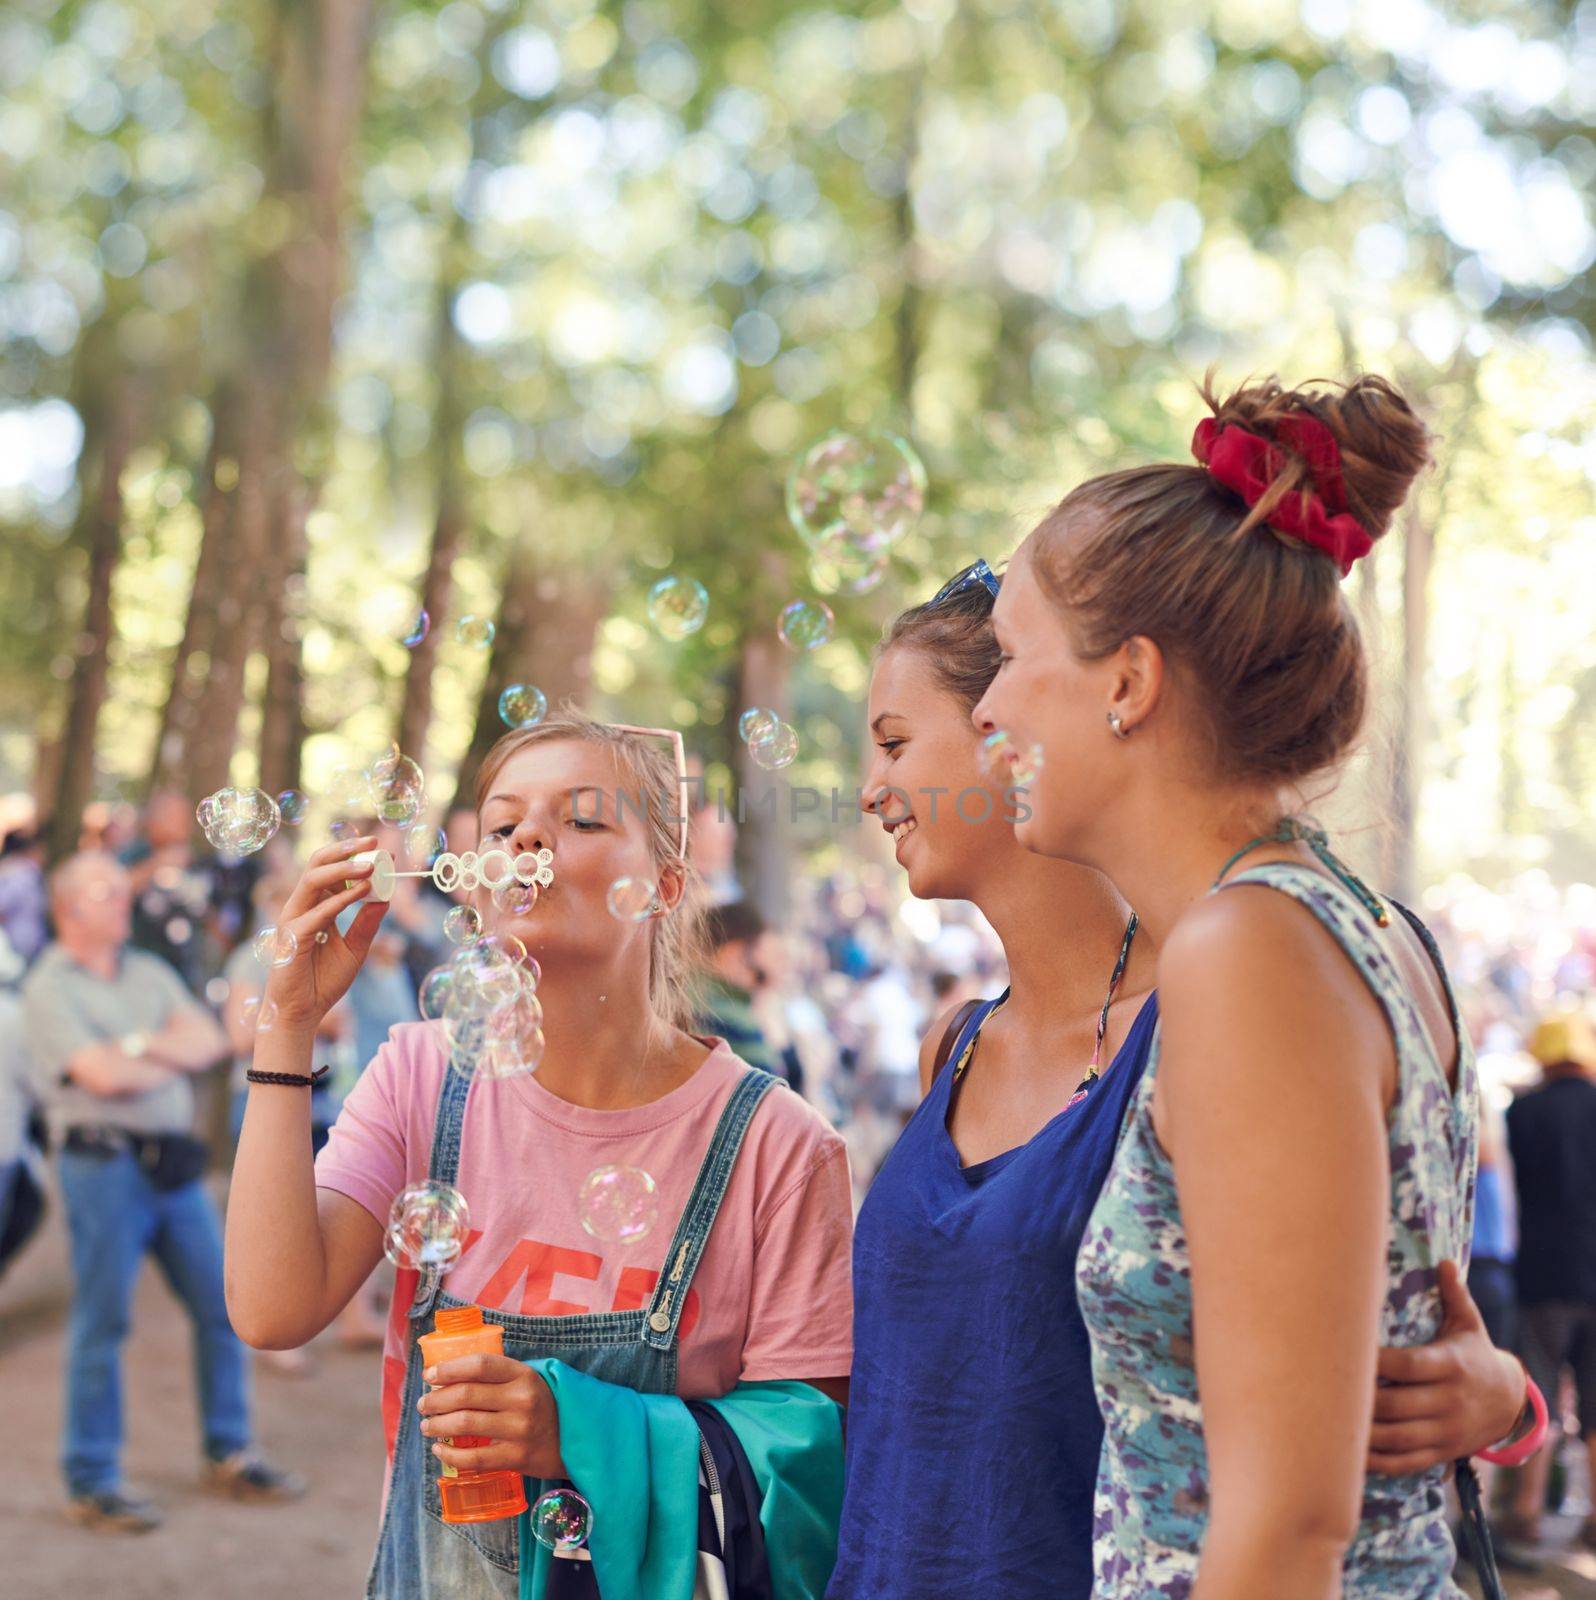 Celebrate your inner child. three young friends blowing bubbles together at an outdoor festival